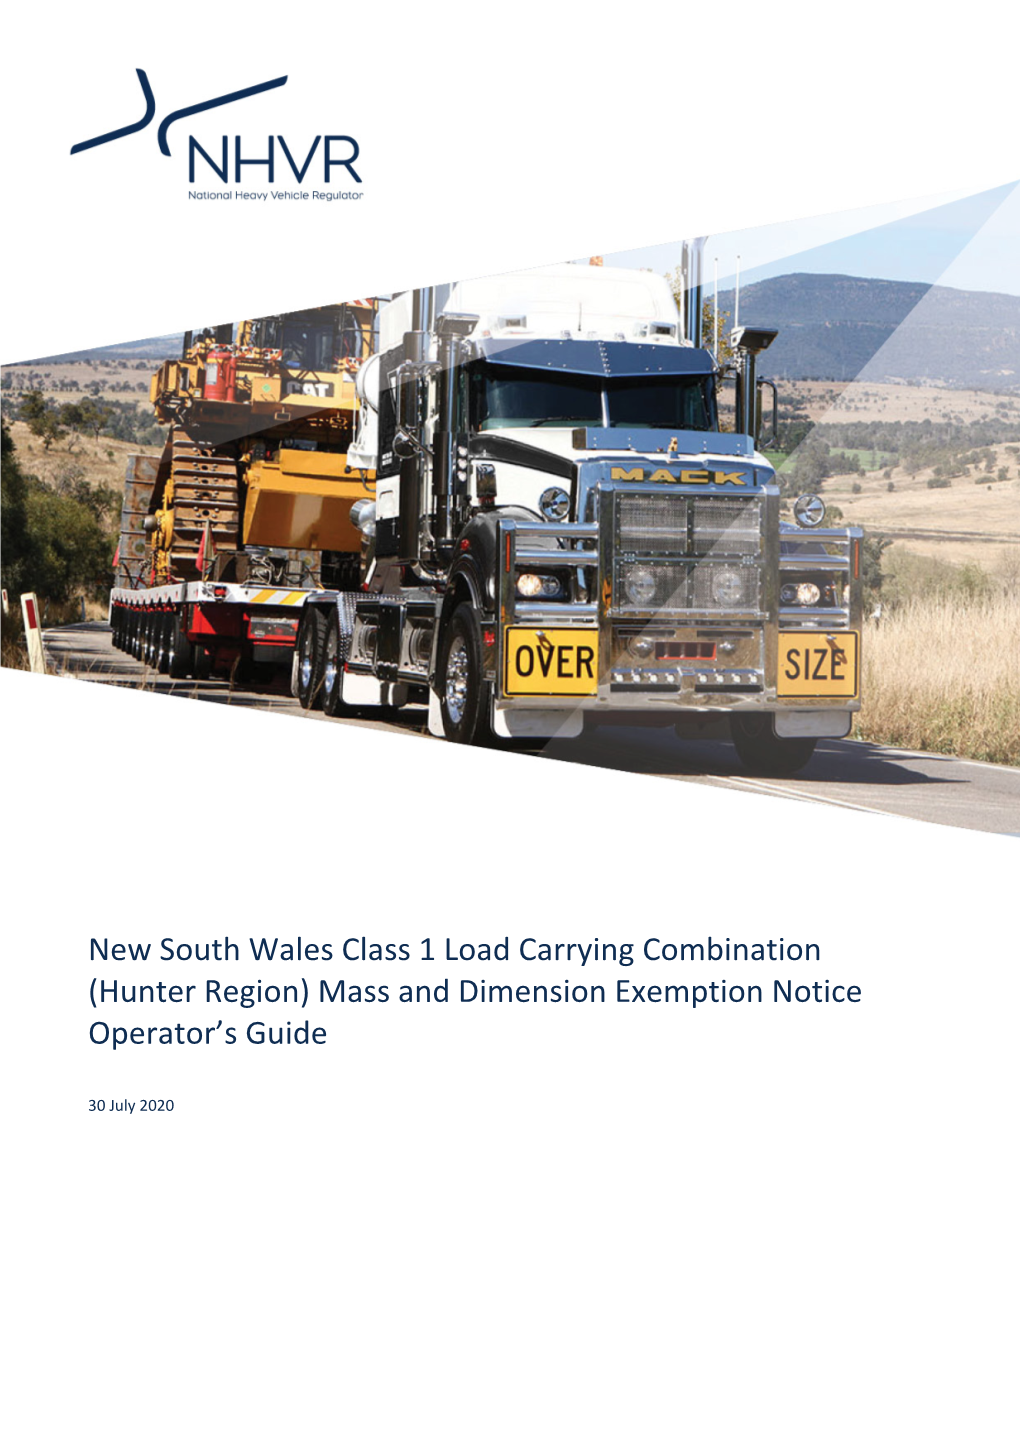 Hunter Region) Mass and Dimension Exemption Notice Operator’S Guide